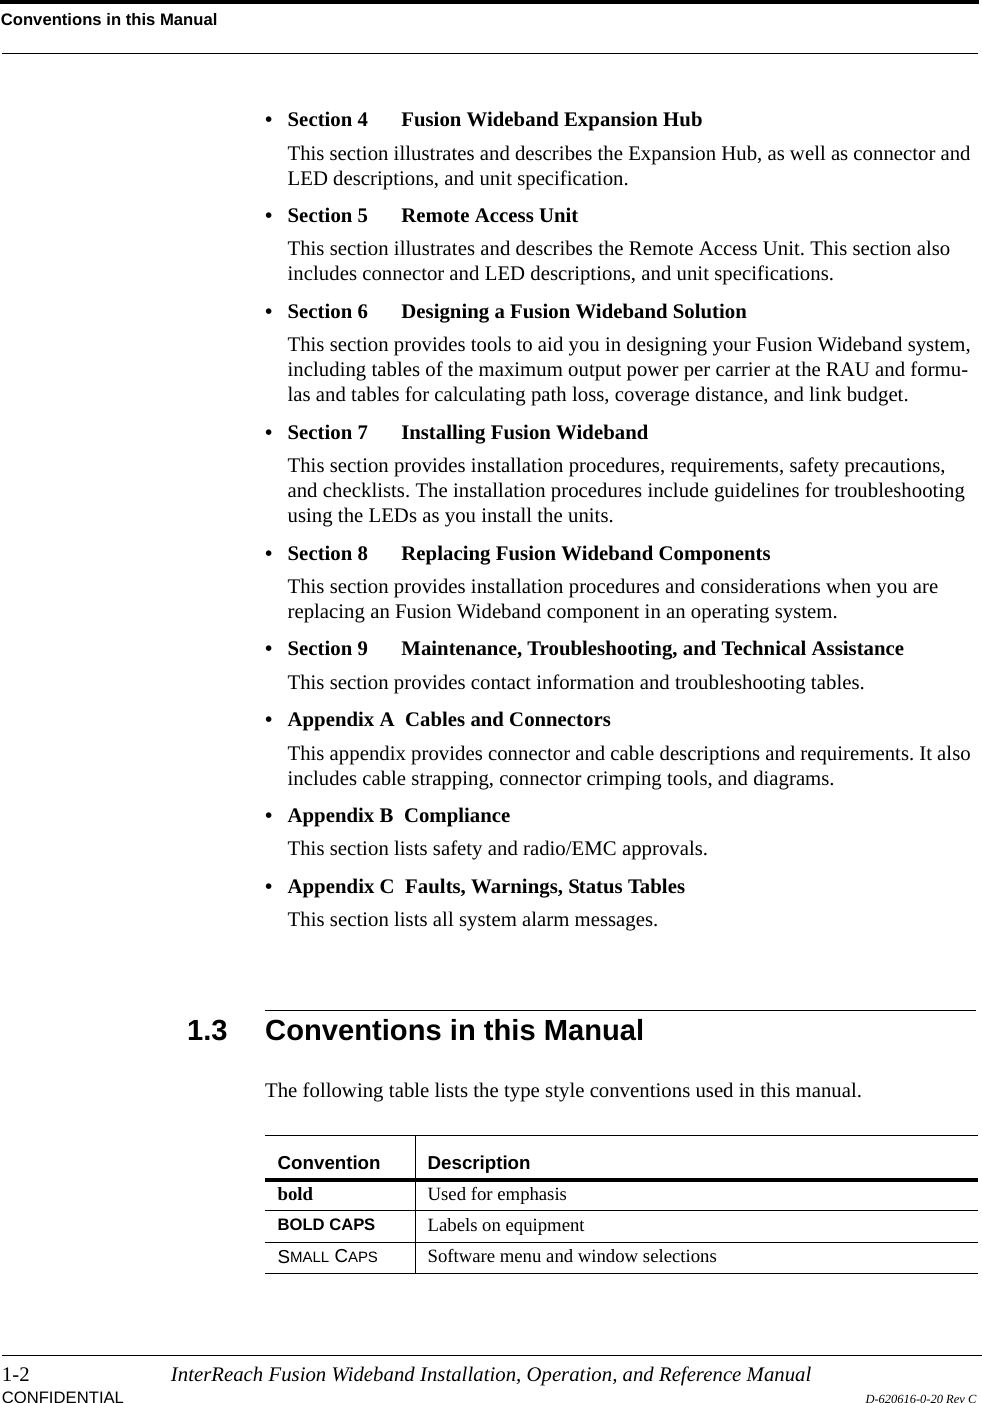 Conventions in this Manual1-2 InterReach Fusion Wideband Installation, Operation, and Reference ManualCONFIDENTIAL D-620616-0-20 Rev C• Section 4   Fusion Wideband Expansion HubThis section illustrates and describes the Expansion Hub, as well as connector and LED descriptions, and unit specification.• Section 5   Remote Access UnitThis section illustrates and describes the Remote Access Unit. This section also includes connector and LED descriptions, and unit specifications.• Section 6   Designing a Fusion Wideband SolutionThis section provides tools to aid you in designing your Fusion Wideband system, including tables of the maximum output power per carrier at the RAU and formu-las and tables for calculating path loss, coverage distance, and link budget.• Section 7   Installing Fusion WidebandThis section provides installation procedures, requirements, safety precautions, and checklists. The installation procedures include guidelines for troubleshooting using the LEDs as you install the units.• Section 8   Replacing Fusion Wideband ComponentsThis section provides installation procedures and considerations when you are replacing an Fusion Wideband component in an operating system.• Section 9  Maintenance, Troubleshooting, and Technical AssistanceThis section provides contact information and troubleshooting tables.• Appendix A  Cables and ConnectorsThis appendix provides connector and cable descriptions and requirements. It also includes cable strapping, connector crimping tools, and diagrams.• Appendix B  ComplianceThis section lists safety and radio/EMC approvals.• Appendix C  Faults, Warnings, Status TablesThis section lists all system alarm messages.1.3 Conventions in this ManualThe following table lists the type style conventions used in this manual.Convention Descriptionbold Used for emphasisBOLD CAPS Labels on equipmentSMALL CAPS Software menu and window selections